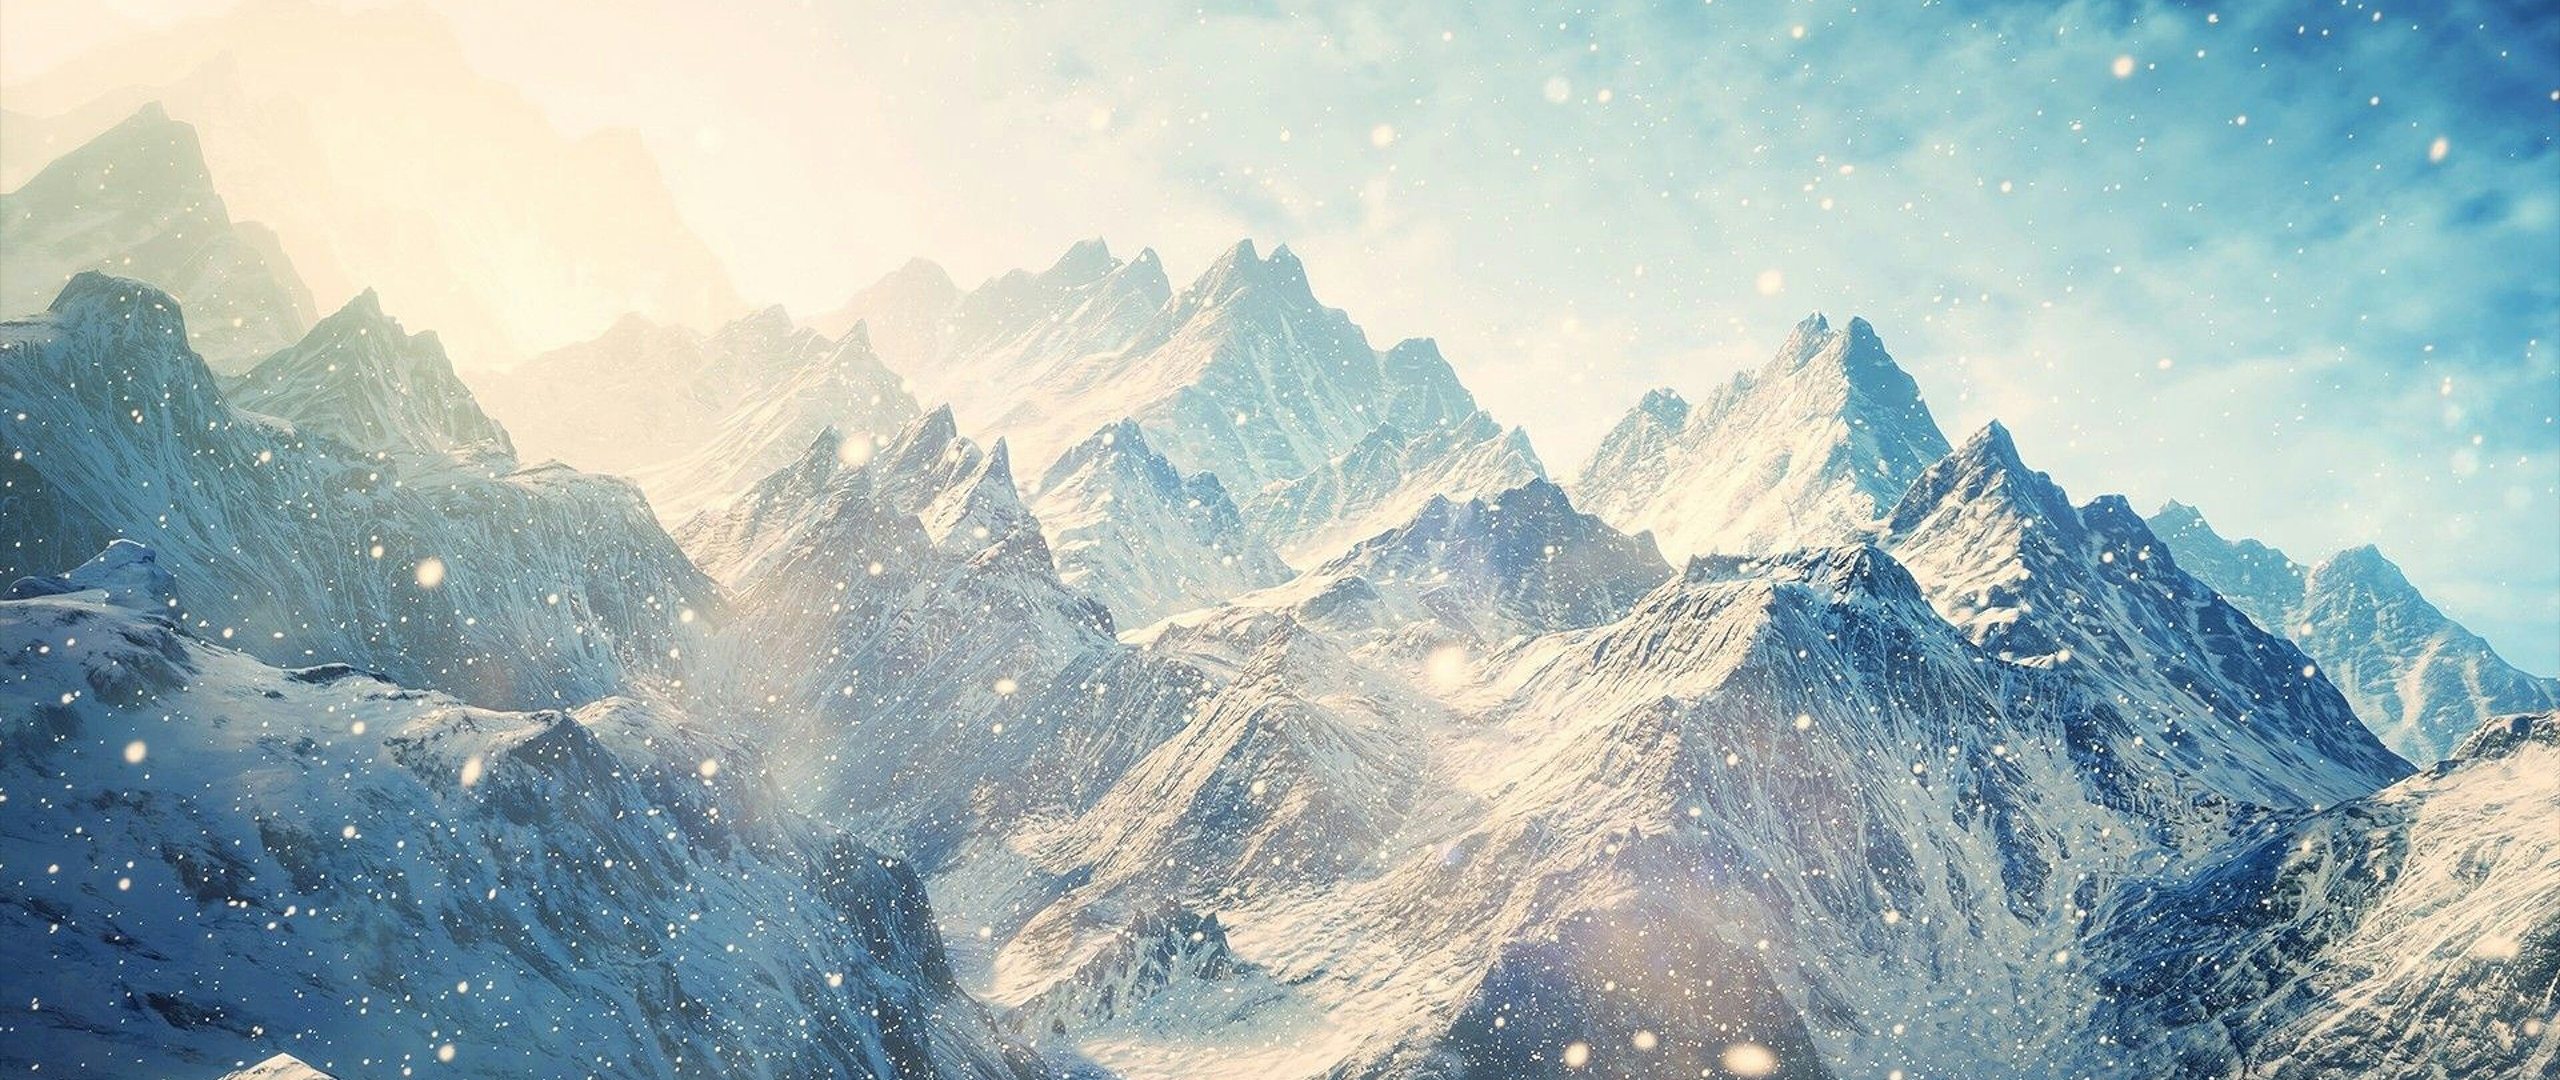 General 2560x1080 ultrawide photography mountains nature snow winter landscape